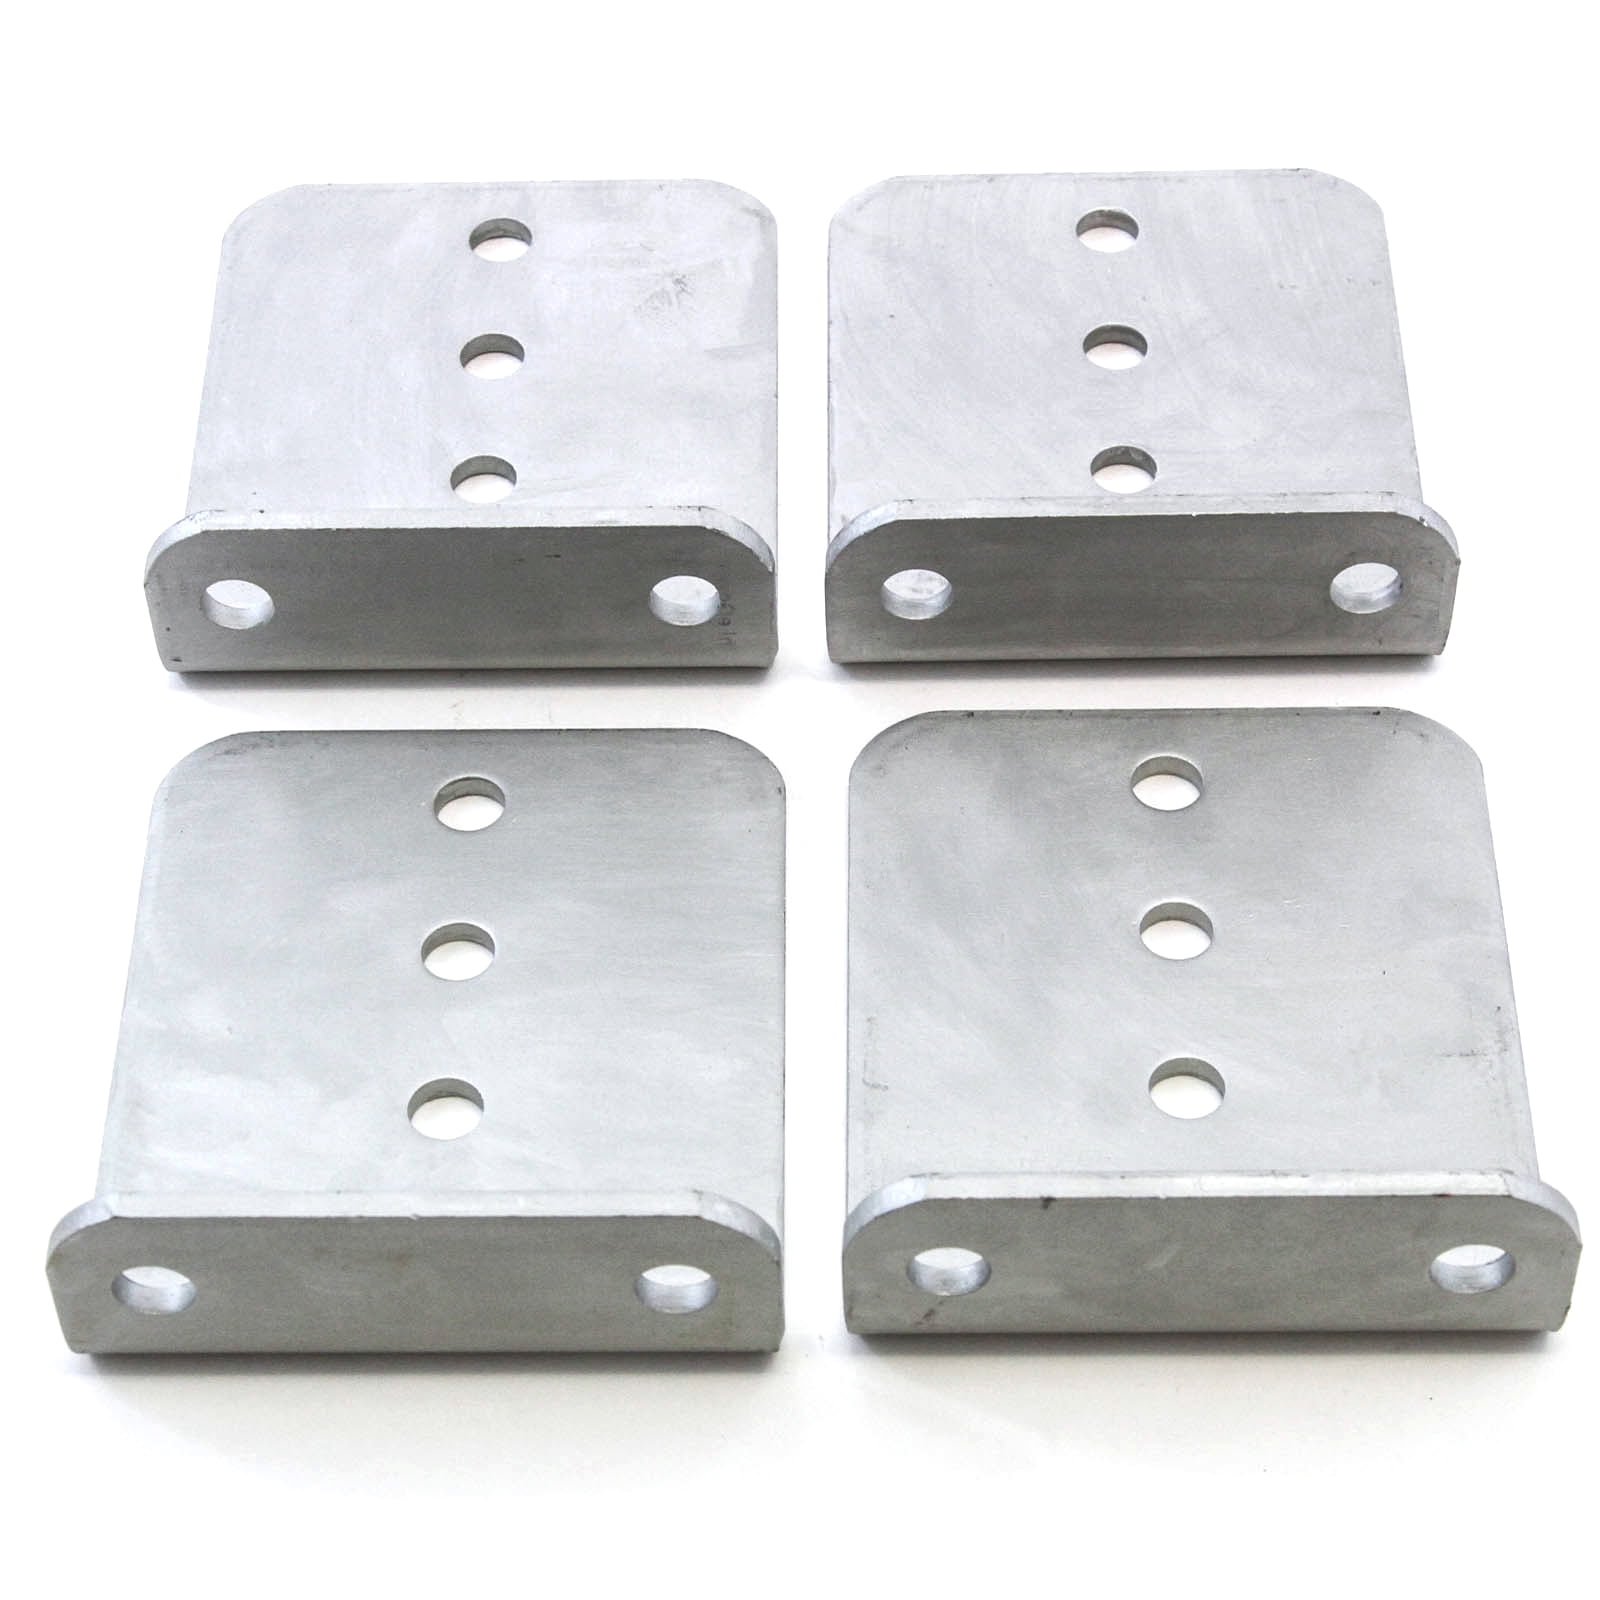 Red Hound Auto 2 L Type Bunk Bracket 6 Tall Hot Dipped Galvanized Boat Trailer Brackets Set